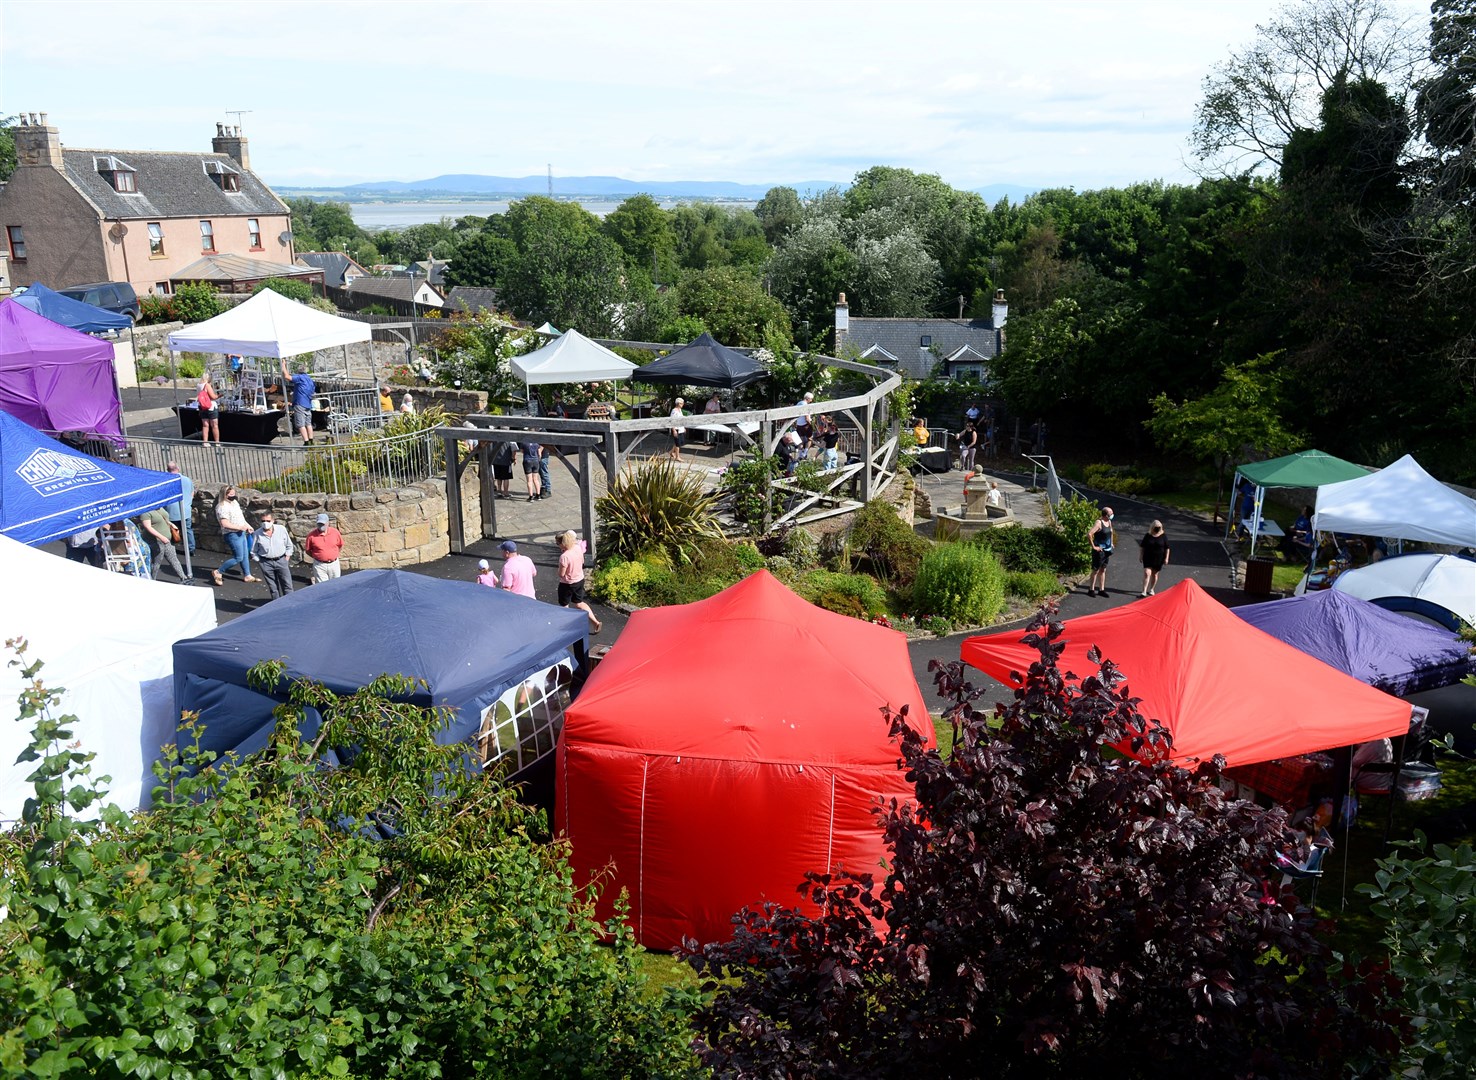 The Tain community market days have proved to be popular draws in the town. Picture: Gary Anthony